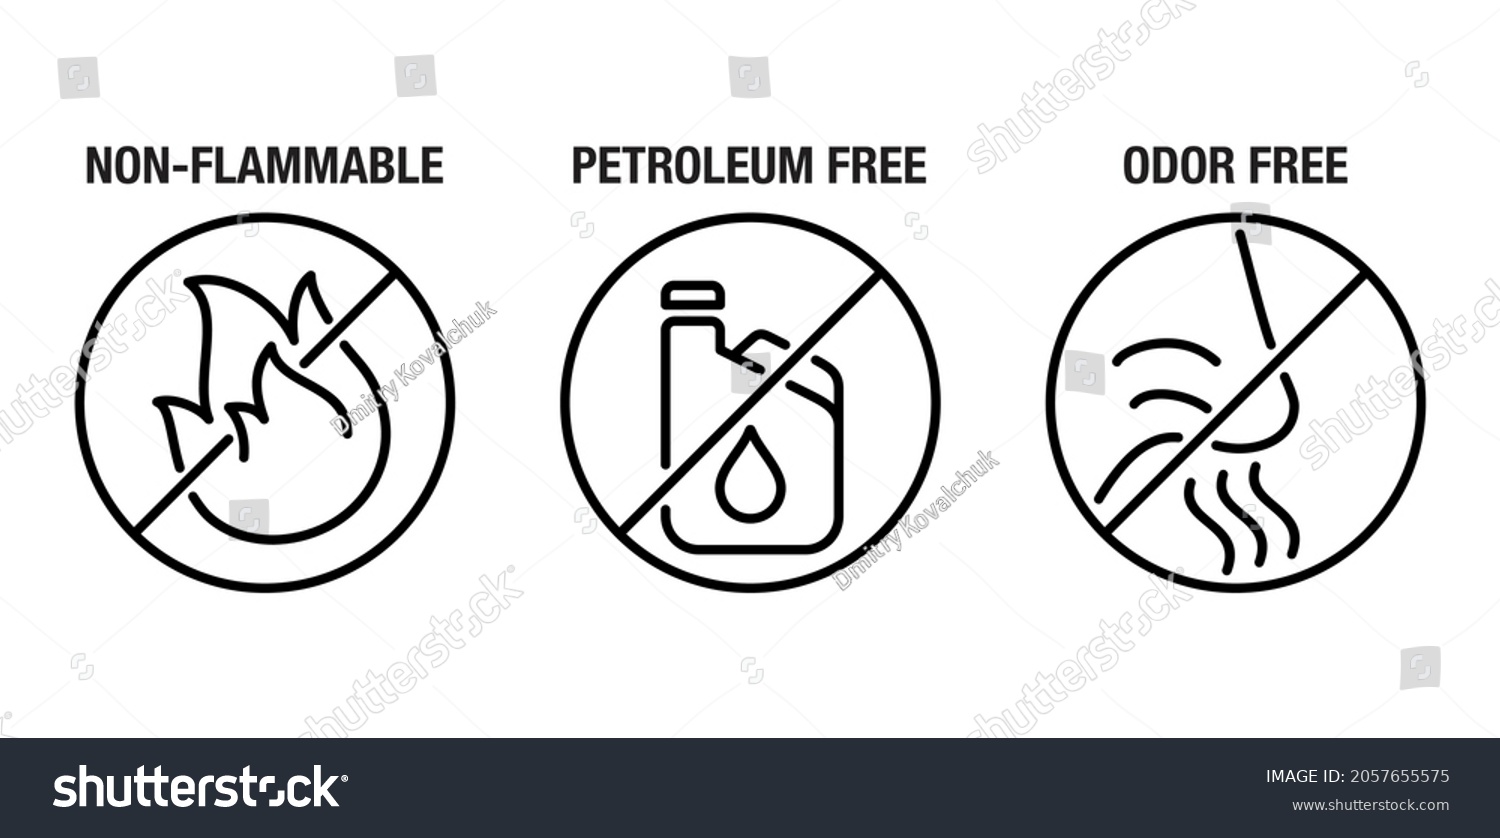 SVG of Non-flammable, Odor free, No Petroleum. Flat icons set for labeling of cleaning agent or other household chemicals svg